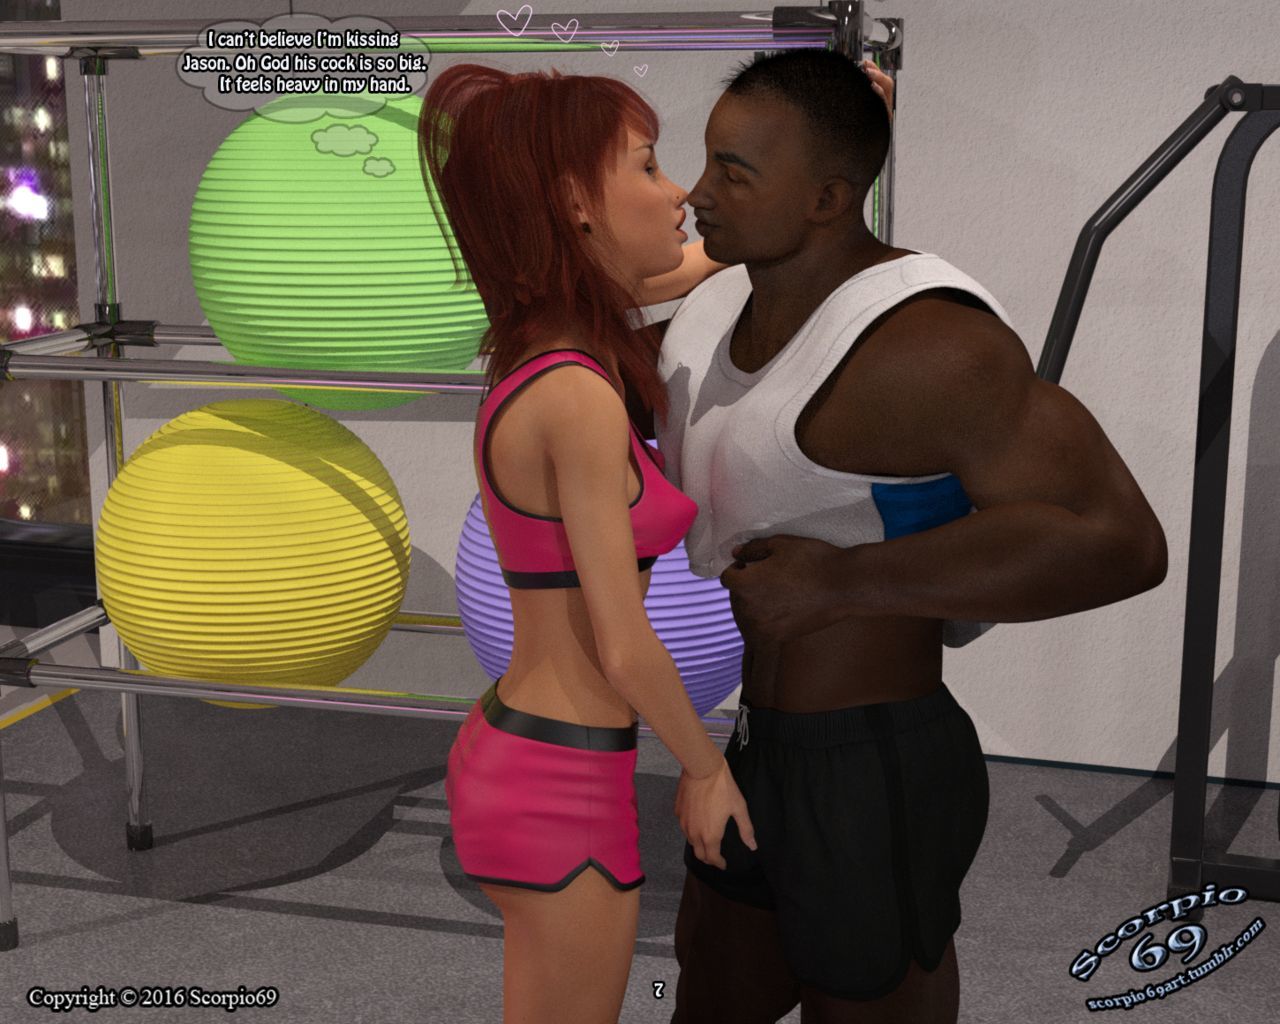 Scorpio69 - The Gym Encounter - Taboo Tales page 9